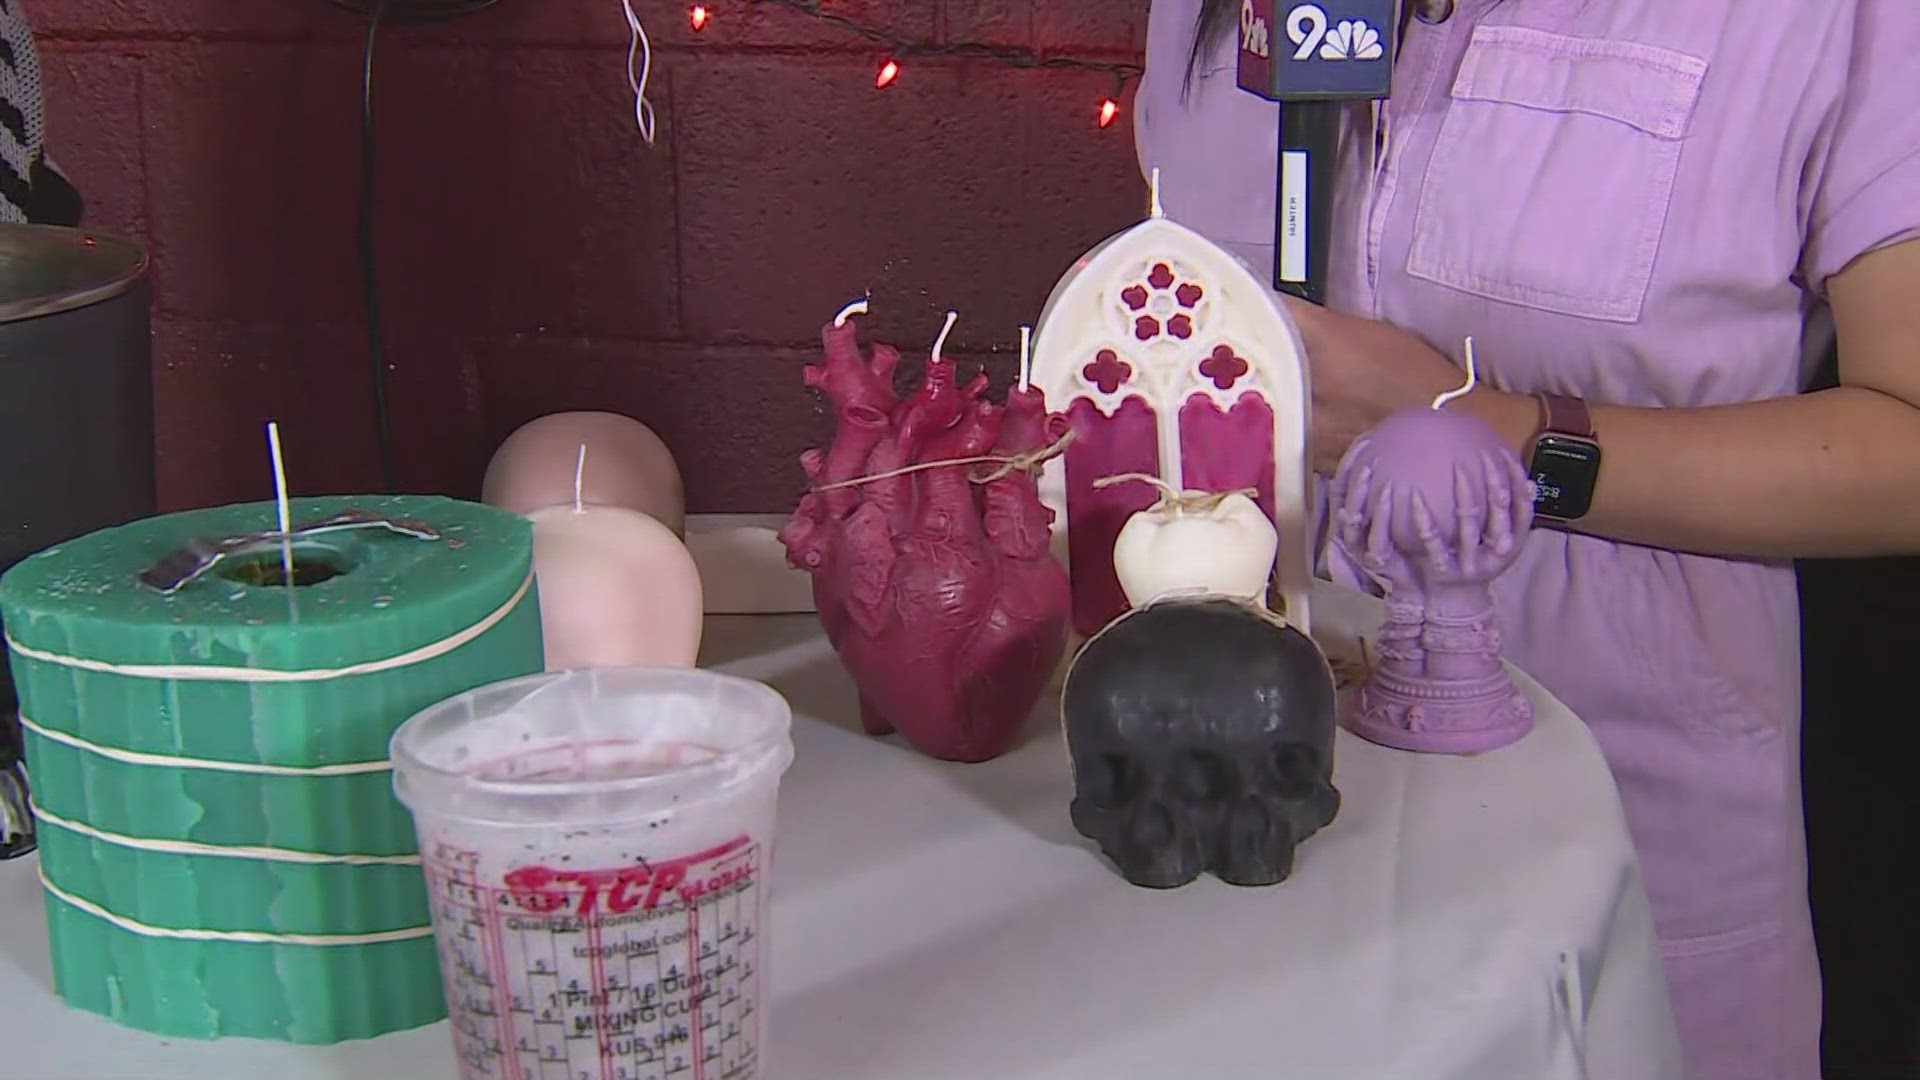 HORRID on Broadway and Acoma in Denver specializes in horror-themed offerings year-round.